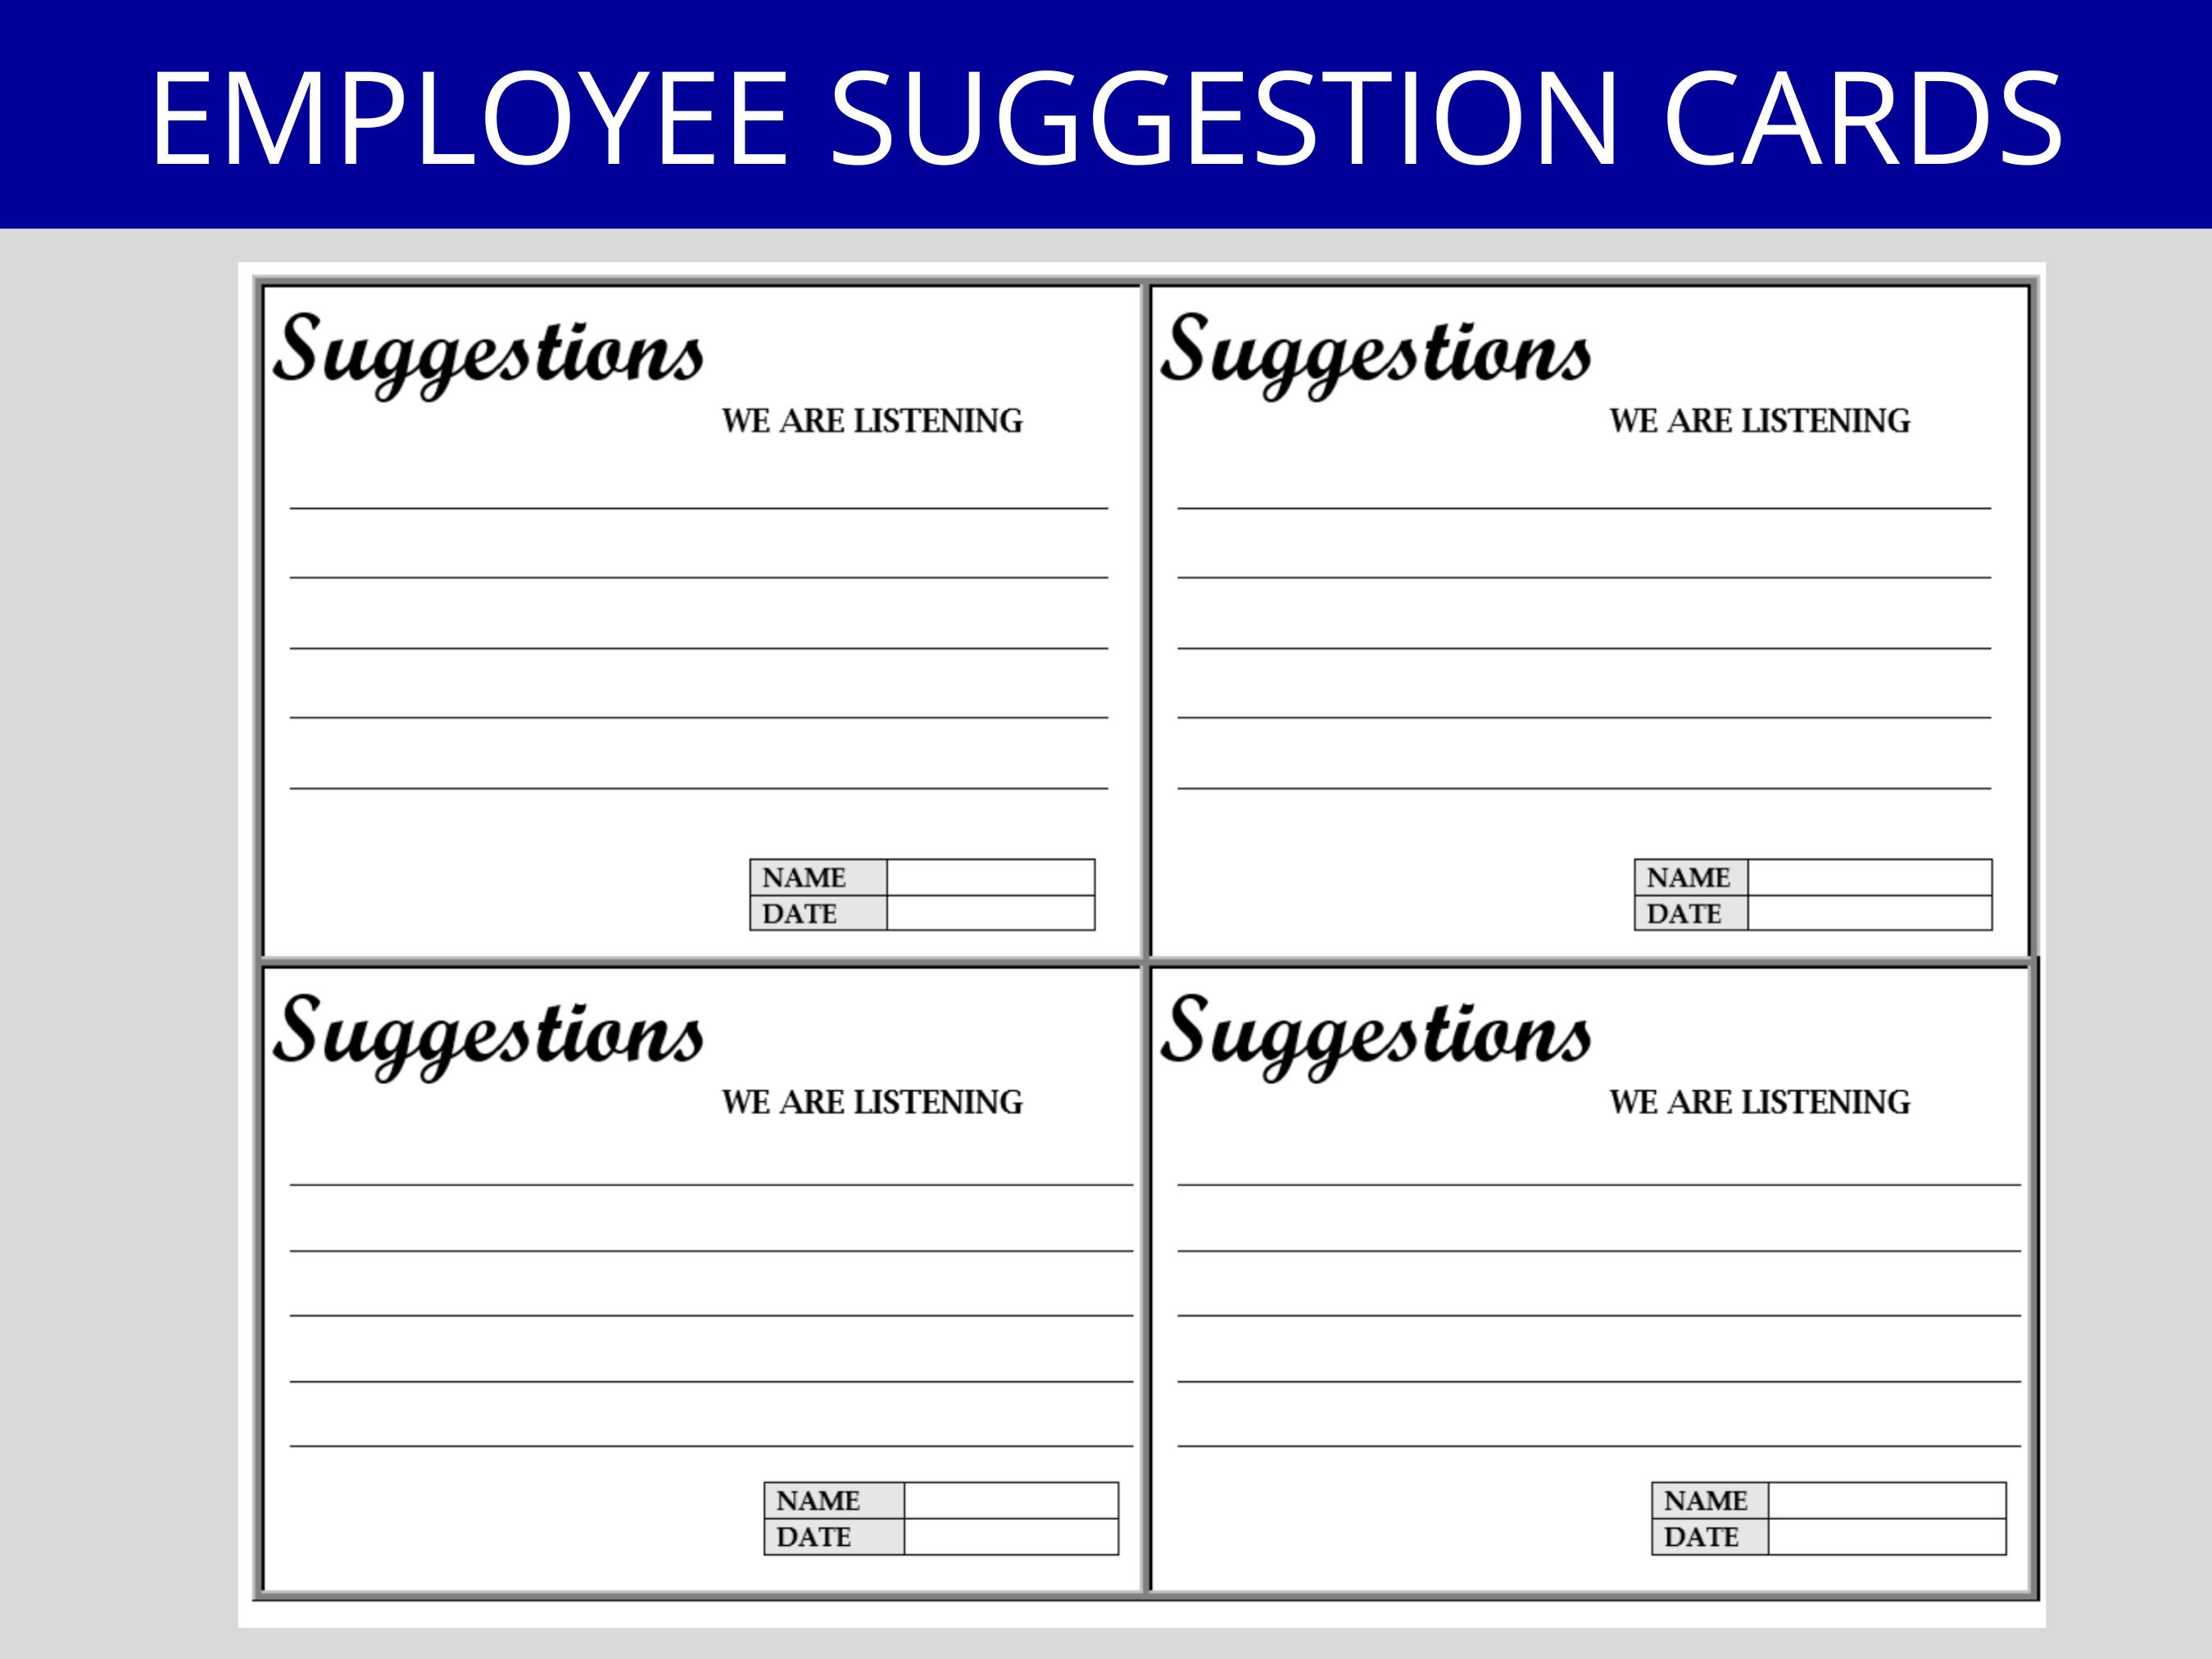 employee-suggestion-card-feedback-suggestions-suggestions-etsy